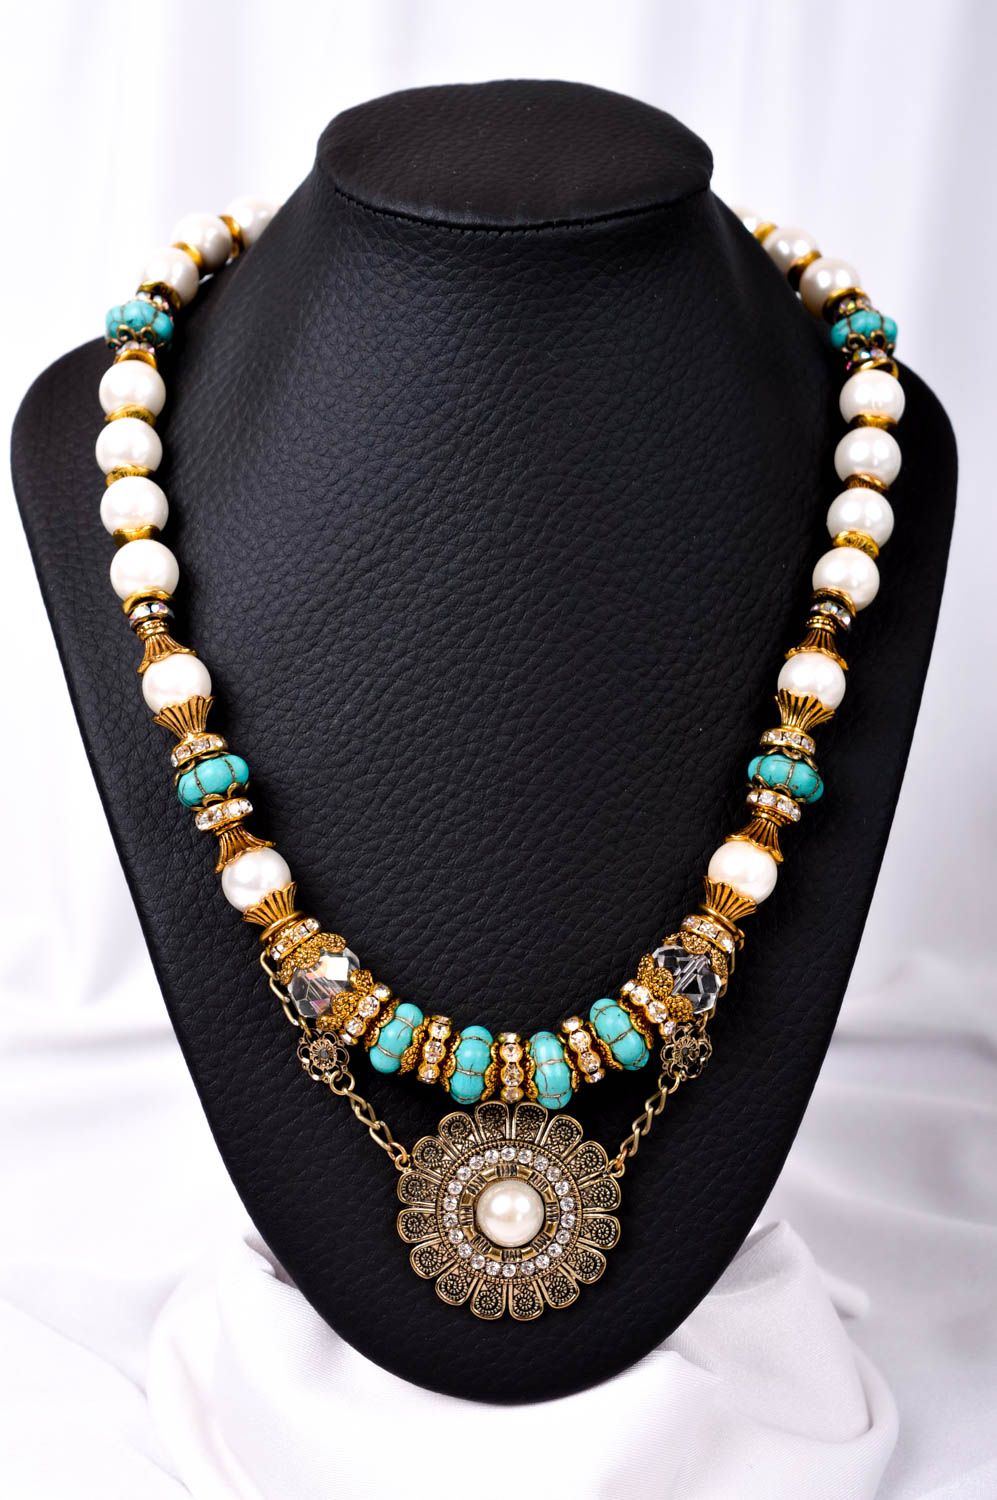 Handmade necklace with stones unusual accessory gift ideas women necklace photo 1